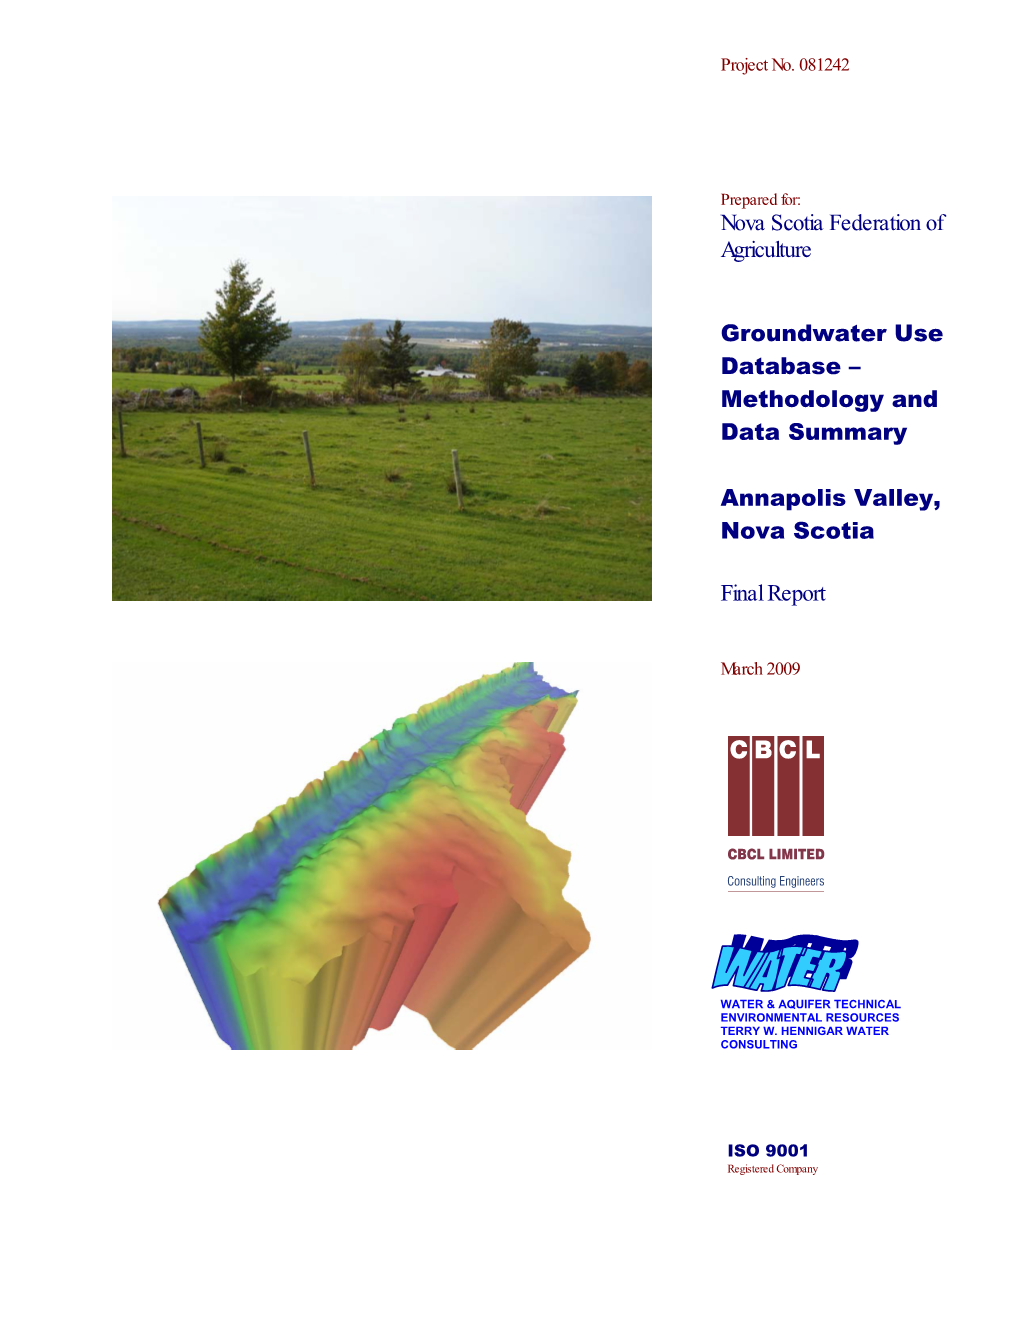 Groundwater Use Survey, Annapolis Valley NS